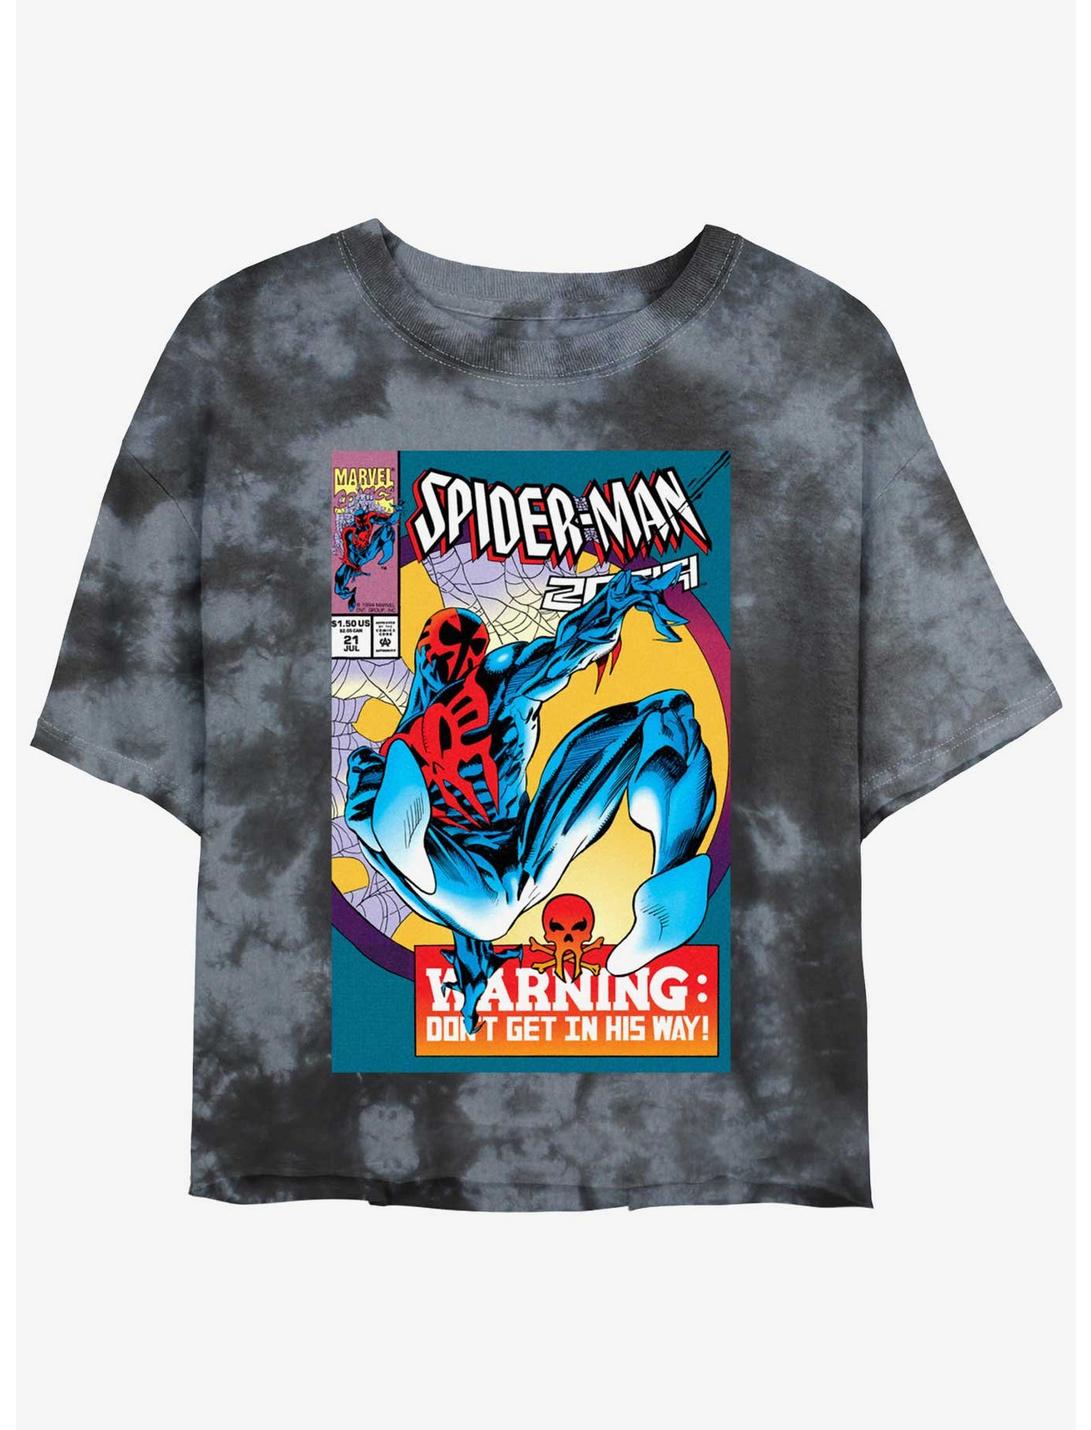 Marvel Spider-Man: Across the Spider-Verse O'Hara 2099 Comic Cover Womens Tie-Dye Crop T-Shirt, BLKCHAR, hi-res